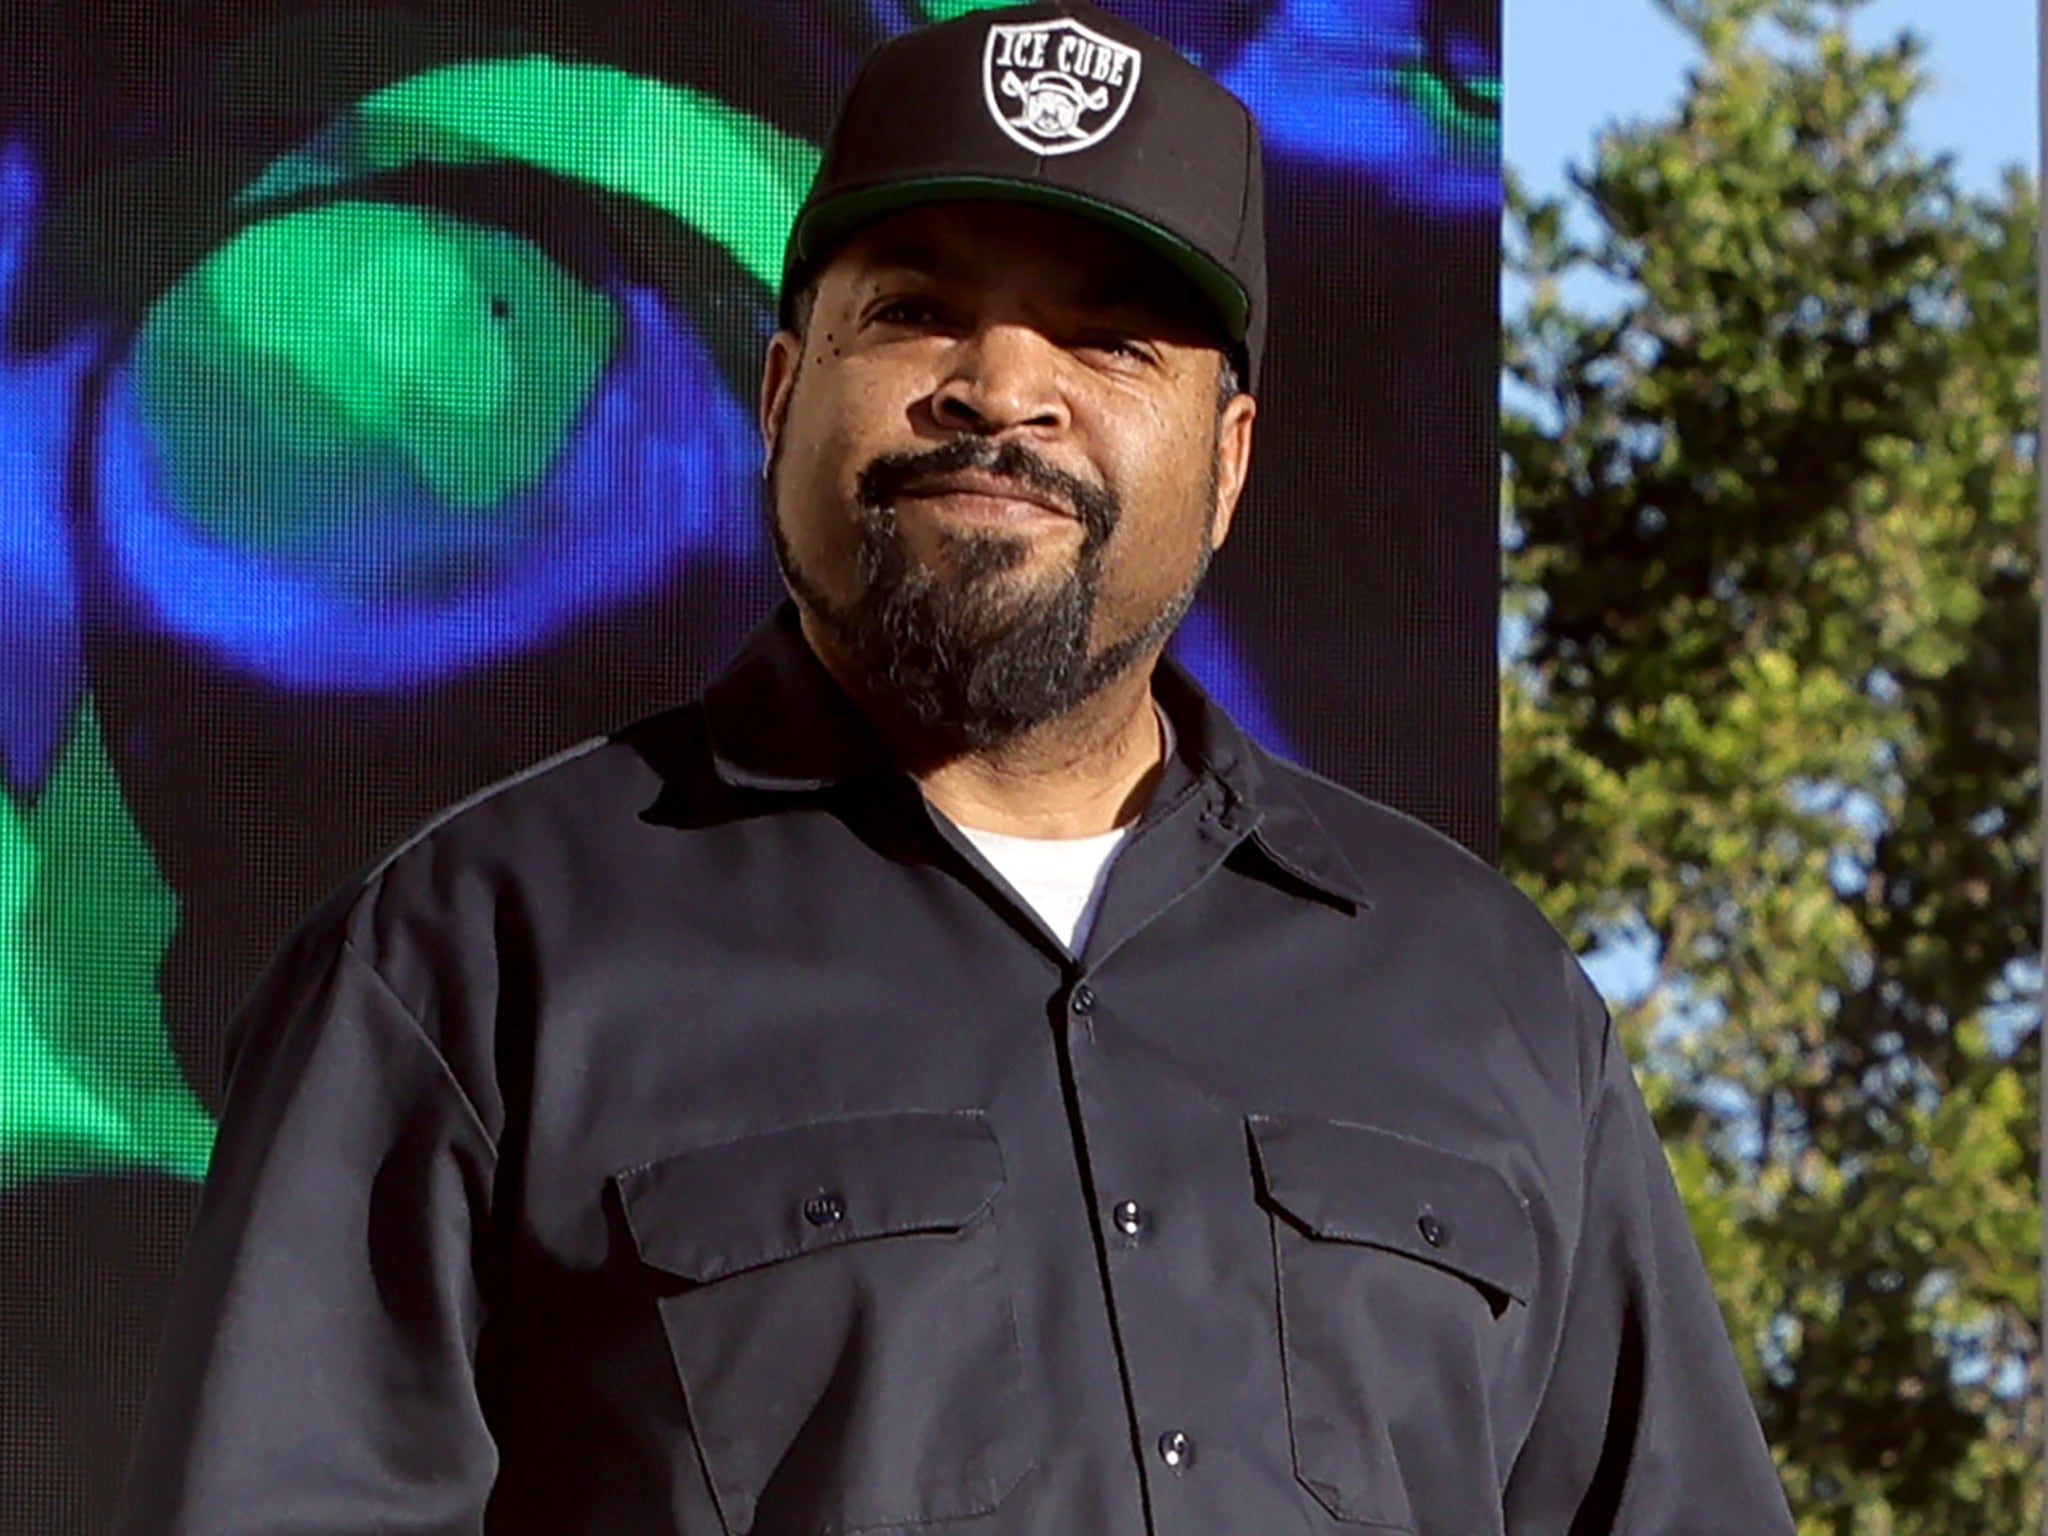 Ice Cube Denies Rumors About Doing a Movie About the L.A. Riots